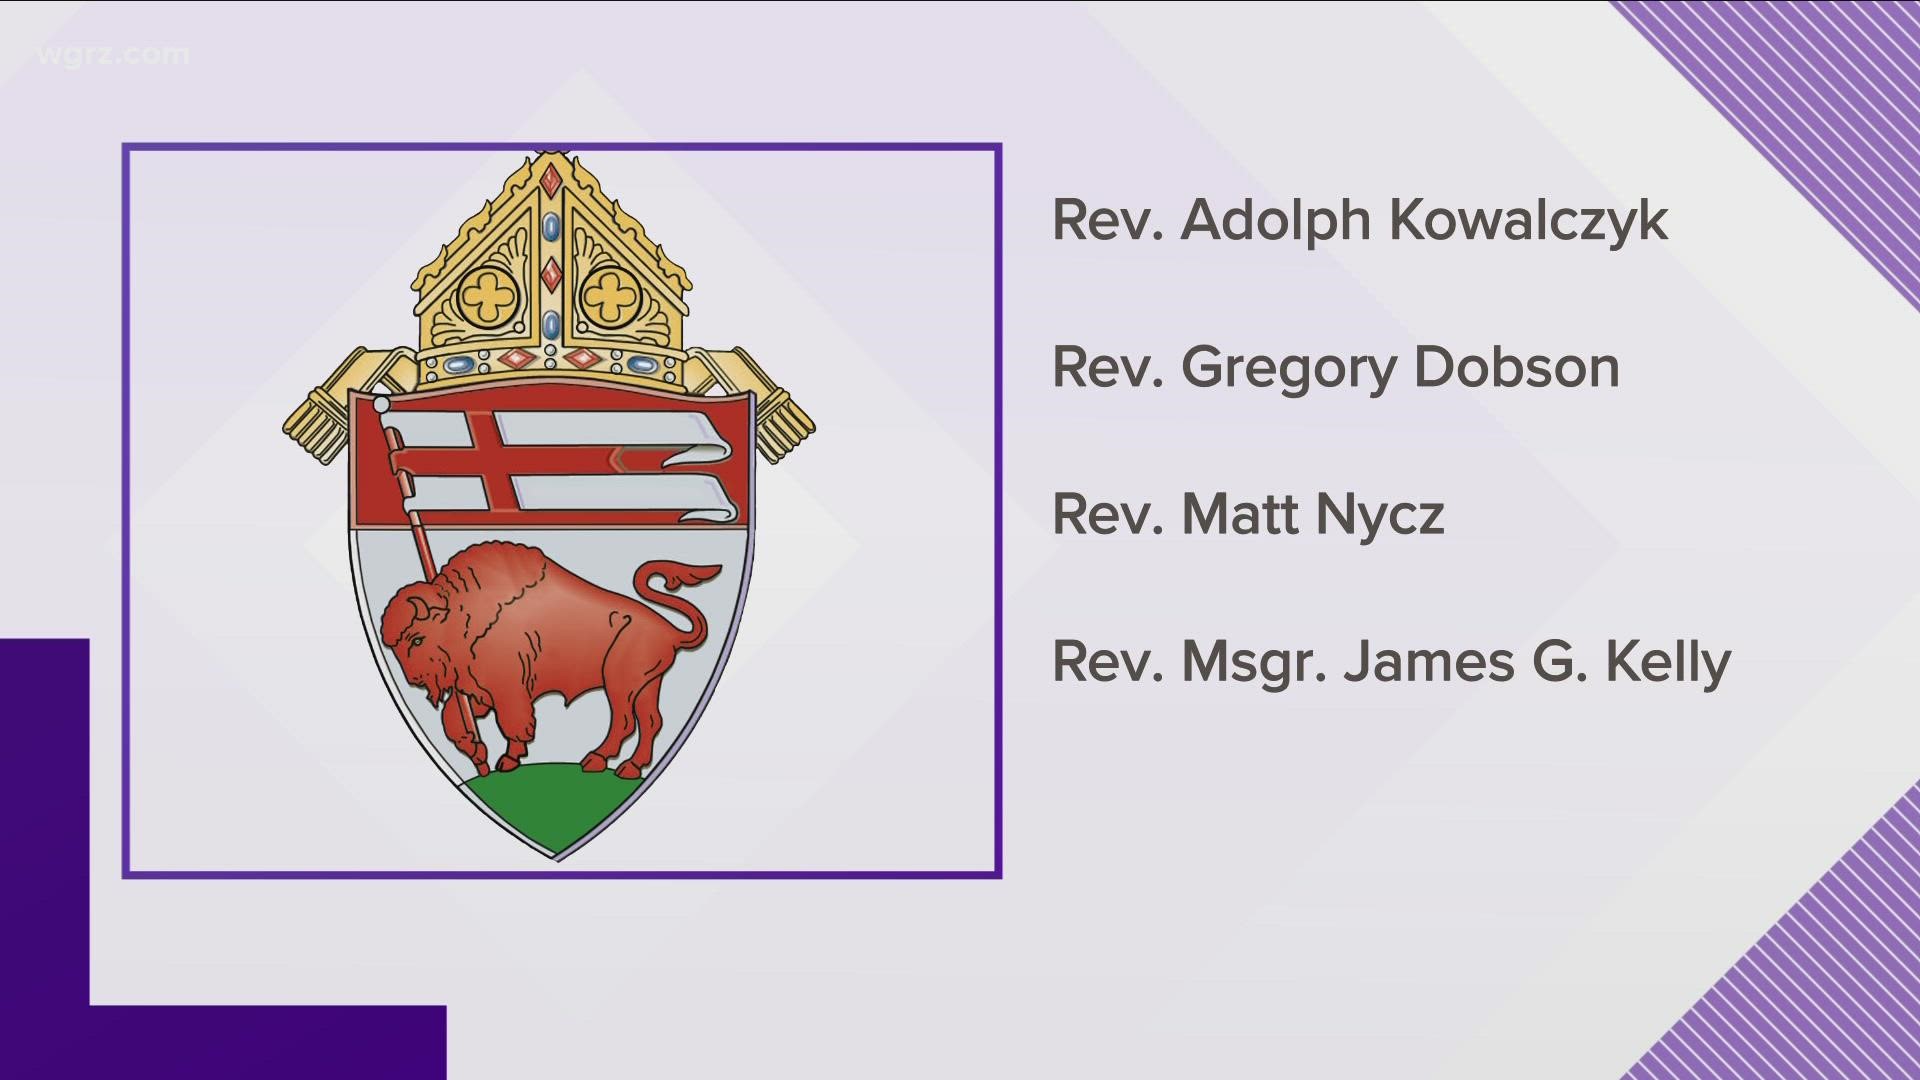 that these four priests are now off of administrative leave... after investigations by its independent review board